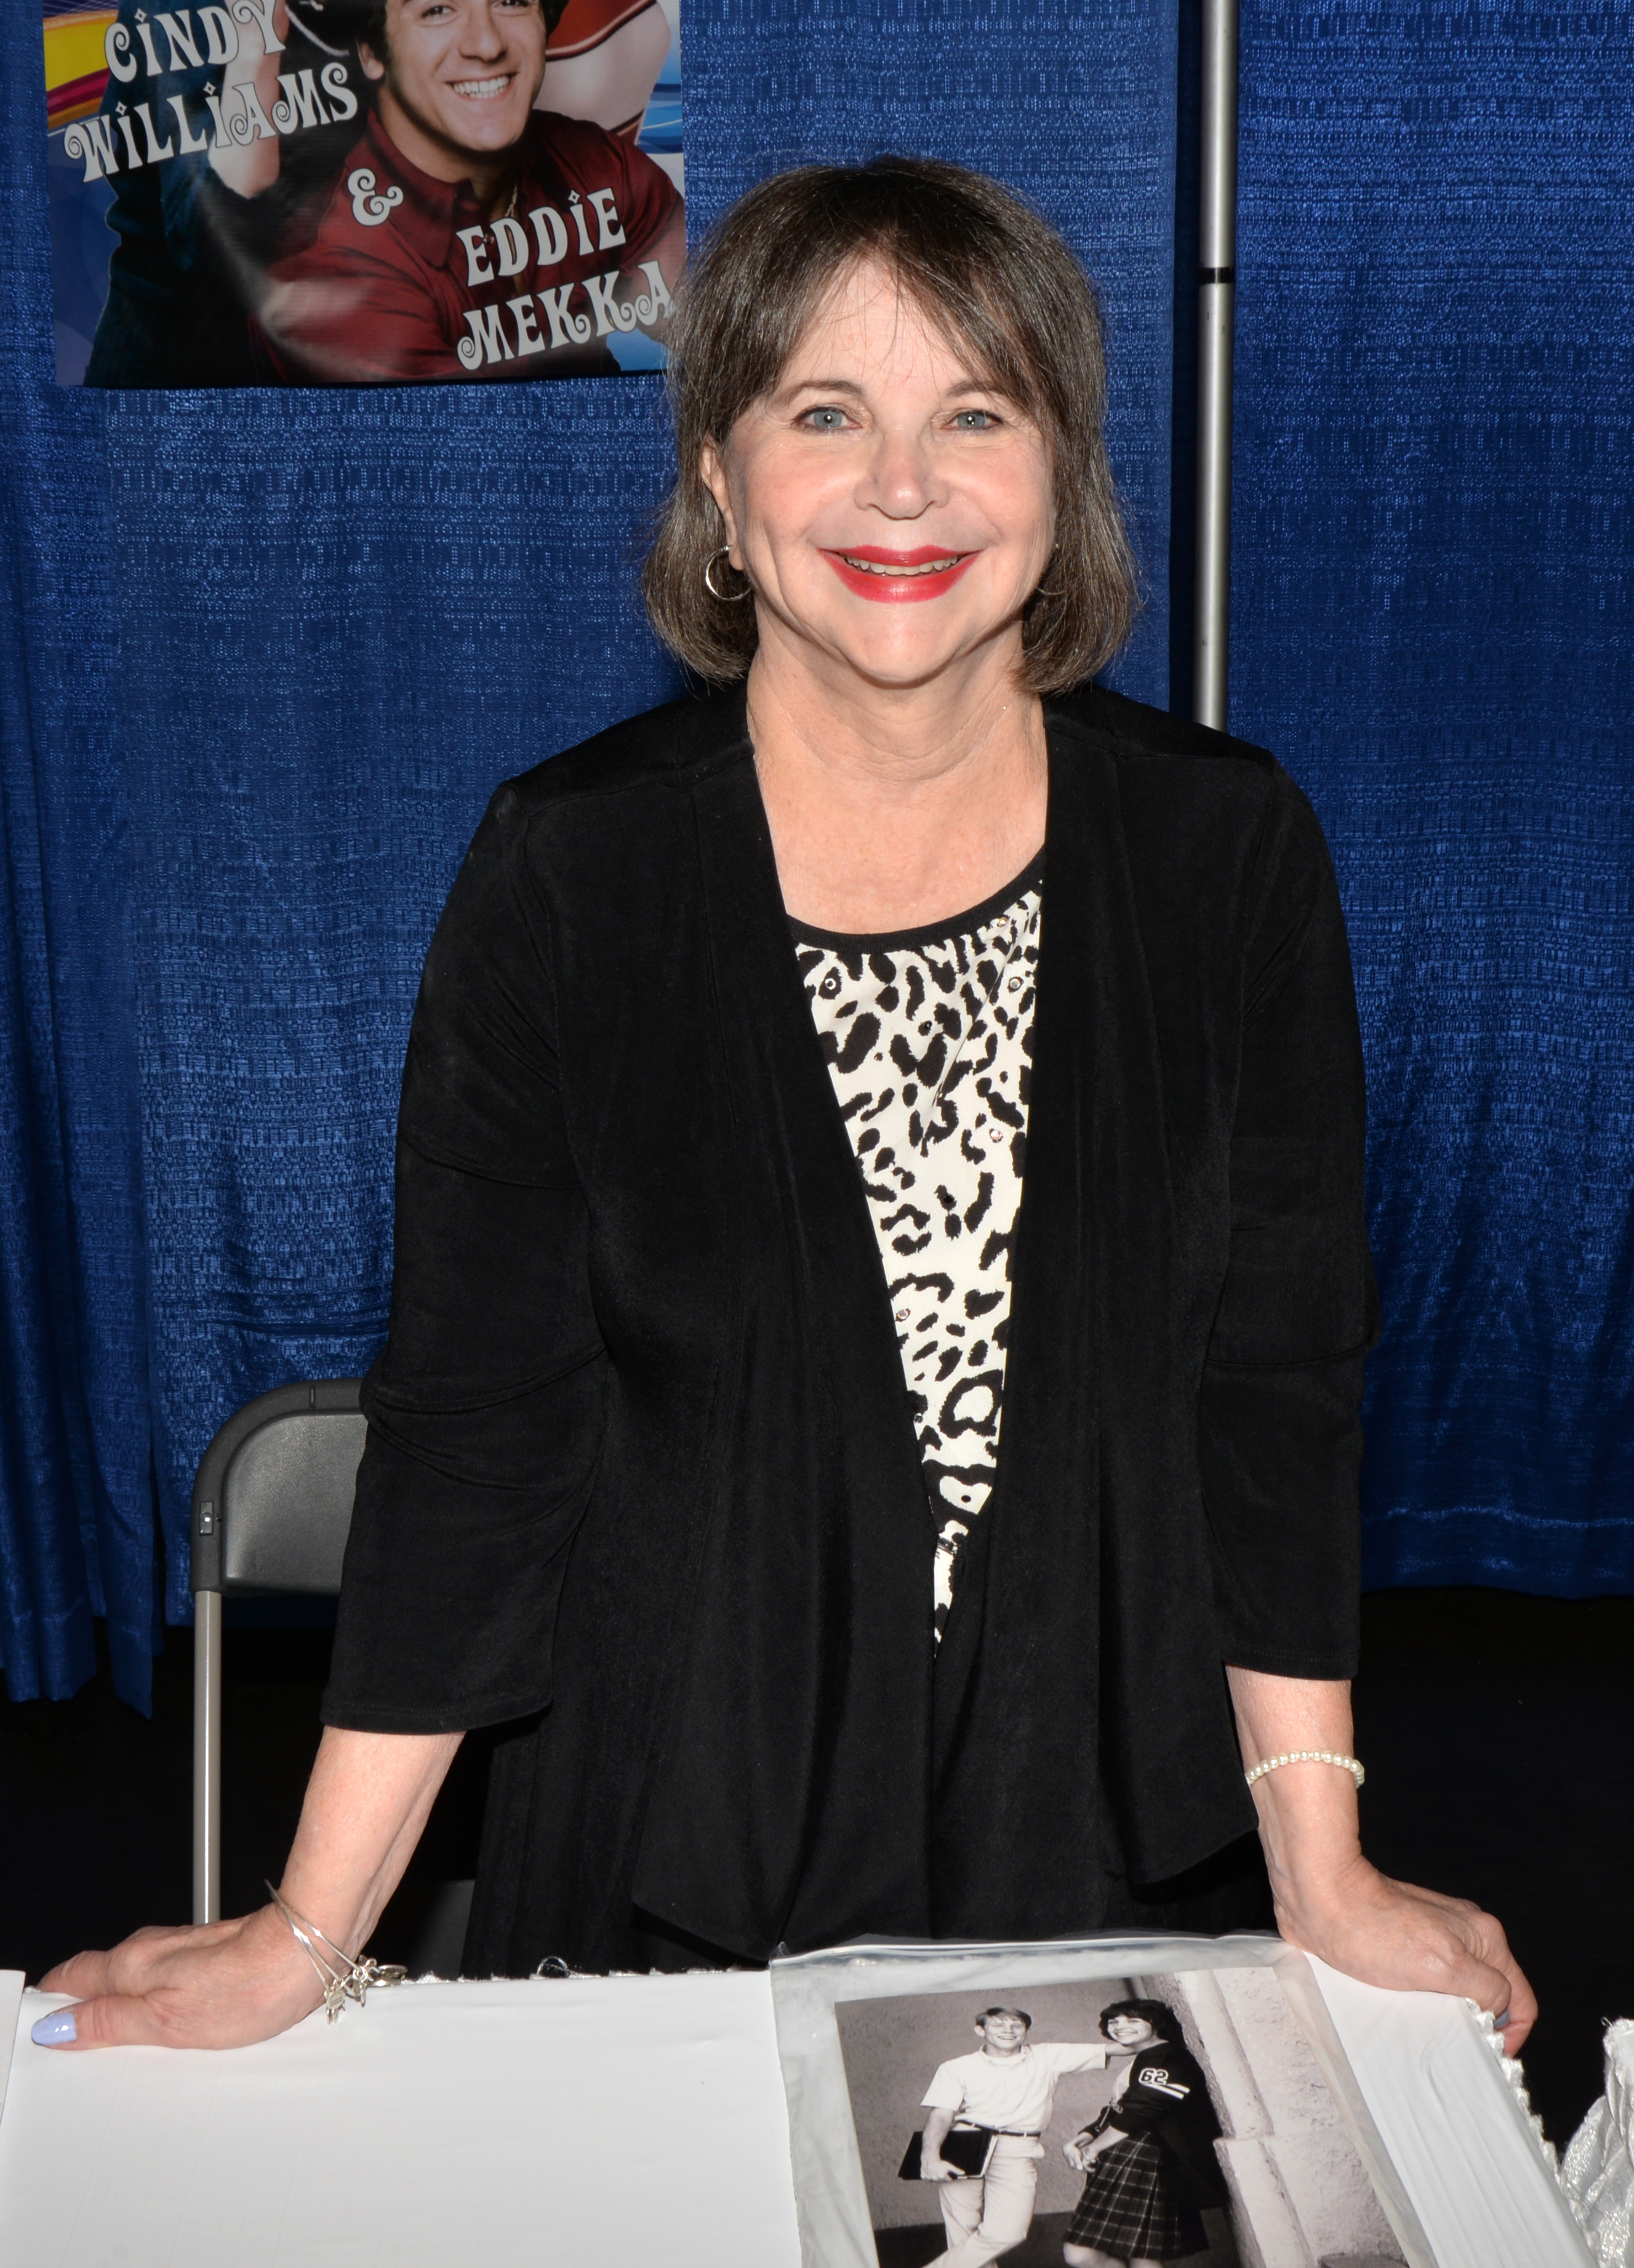 Cindy Williams passed away at age 75